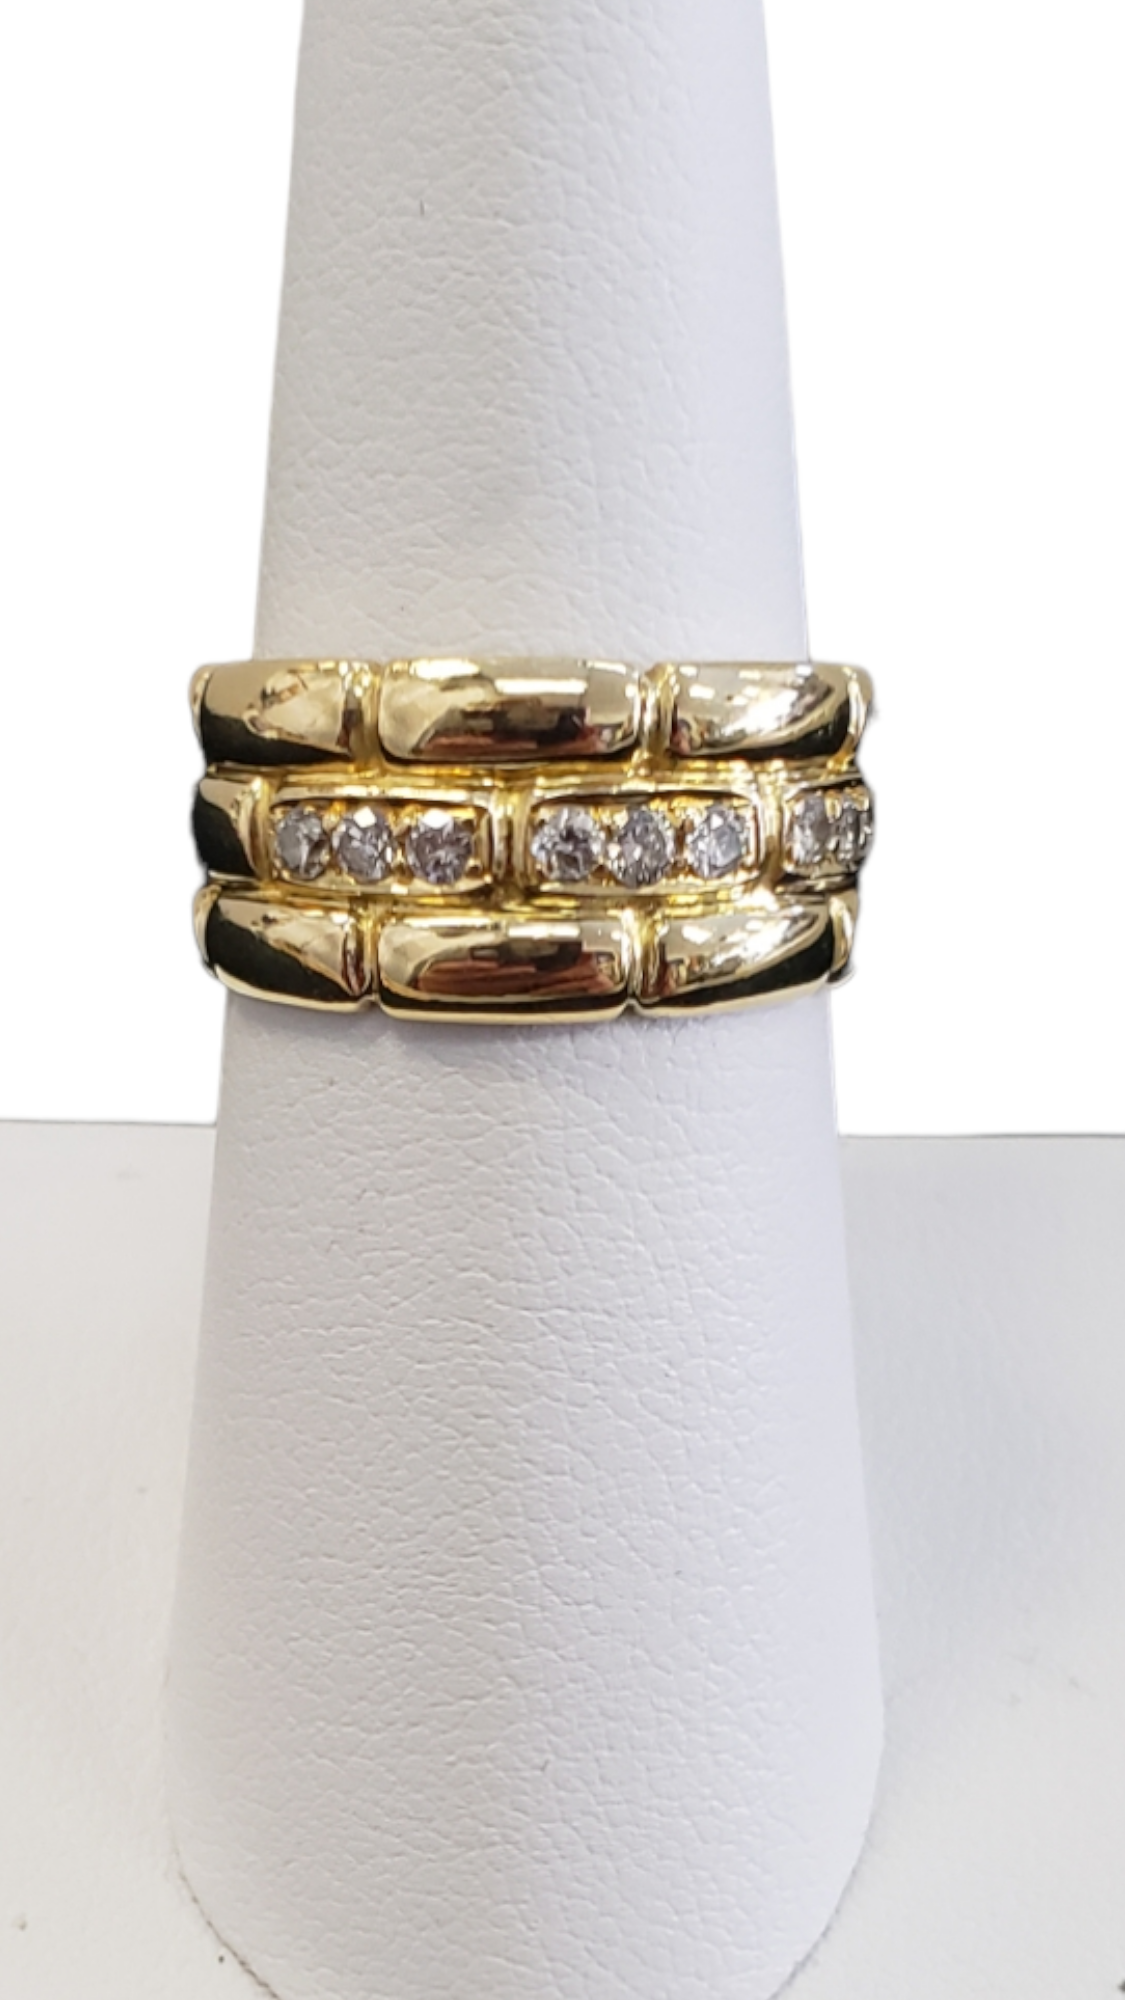 Diamond and Yellow Gold Wide band Ring, 18kt yellow gold